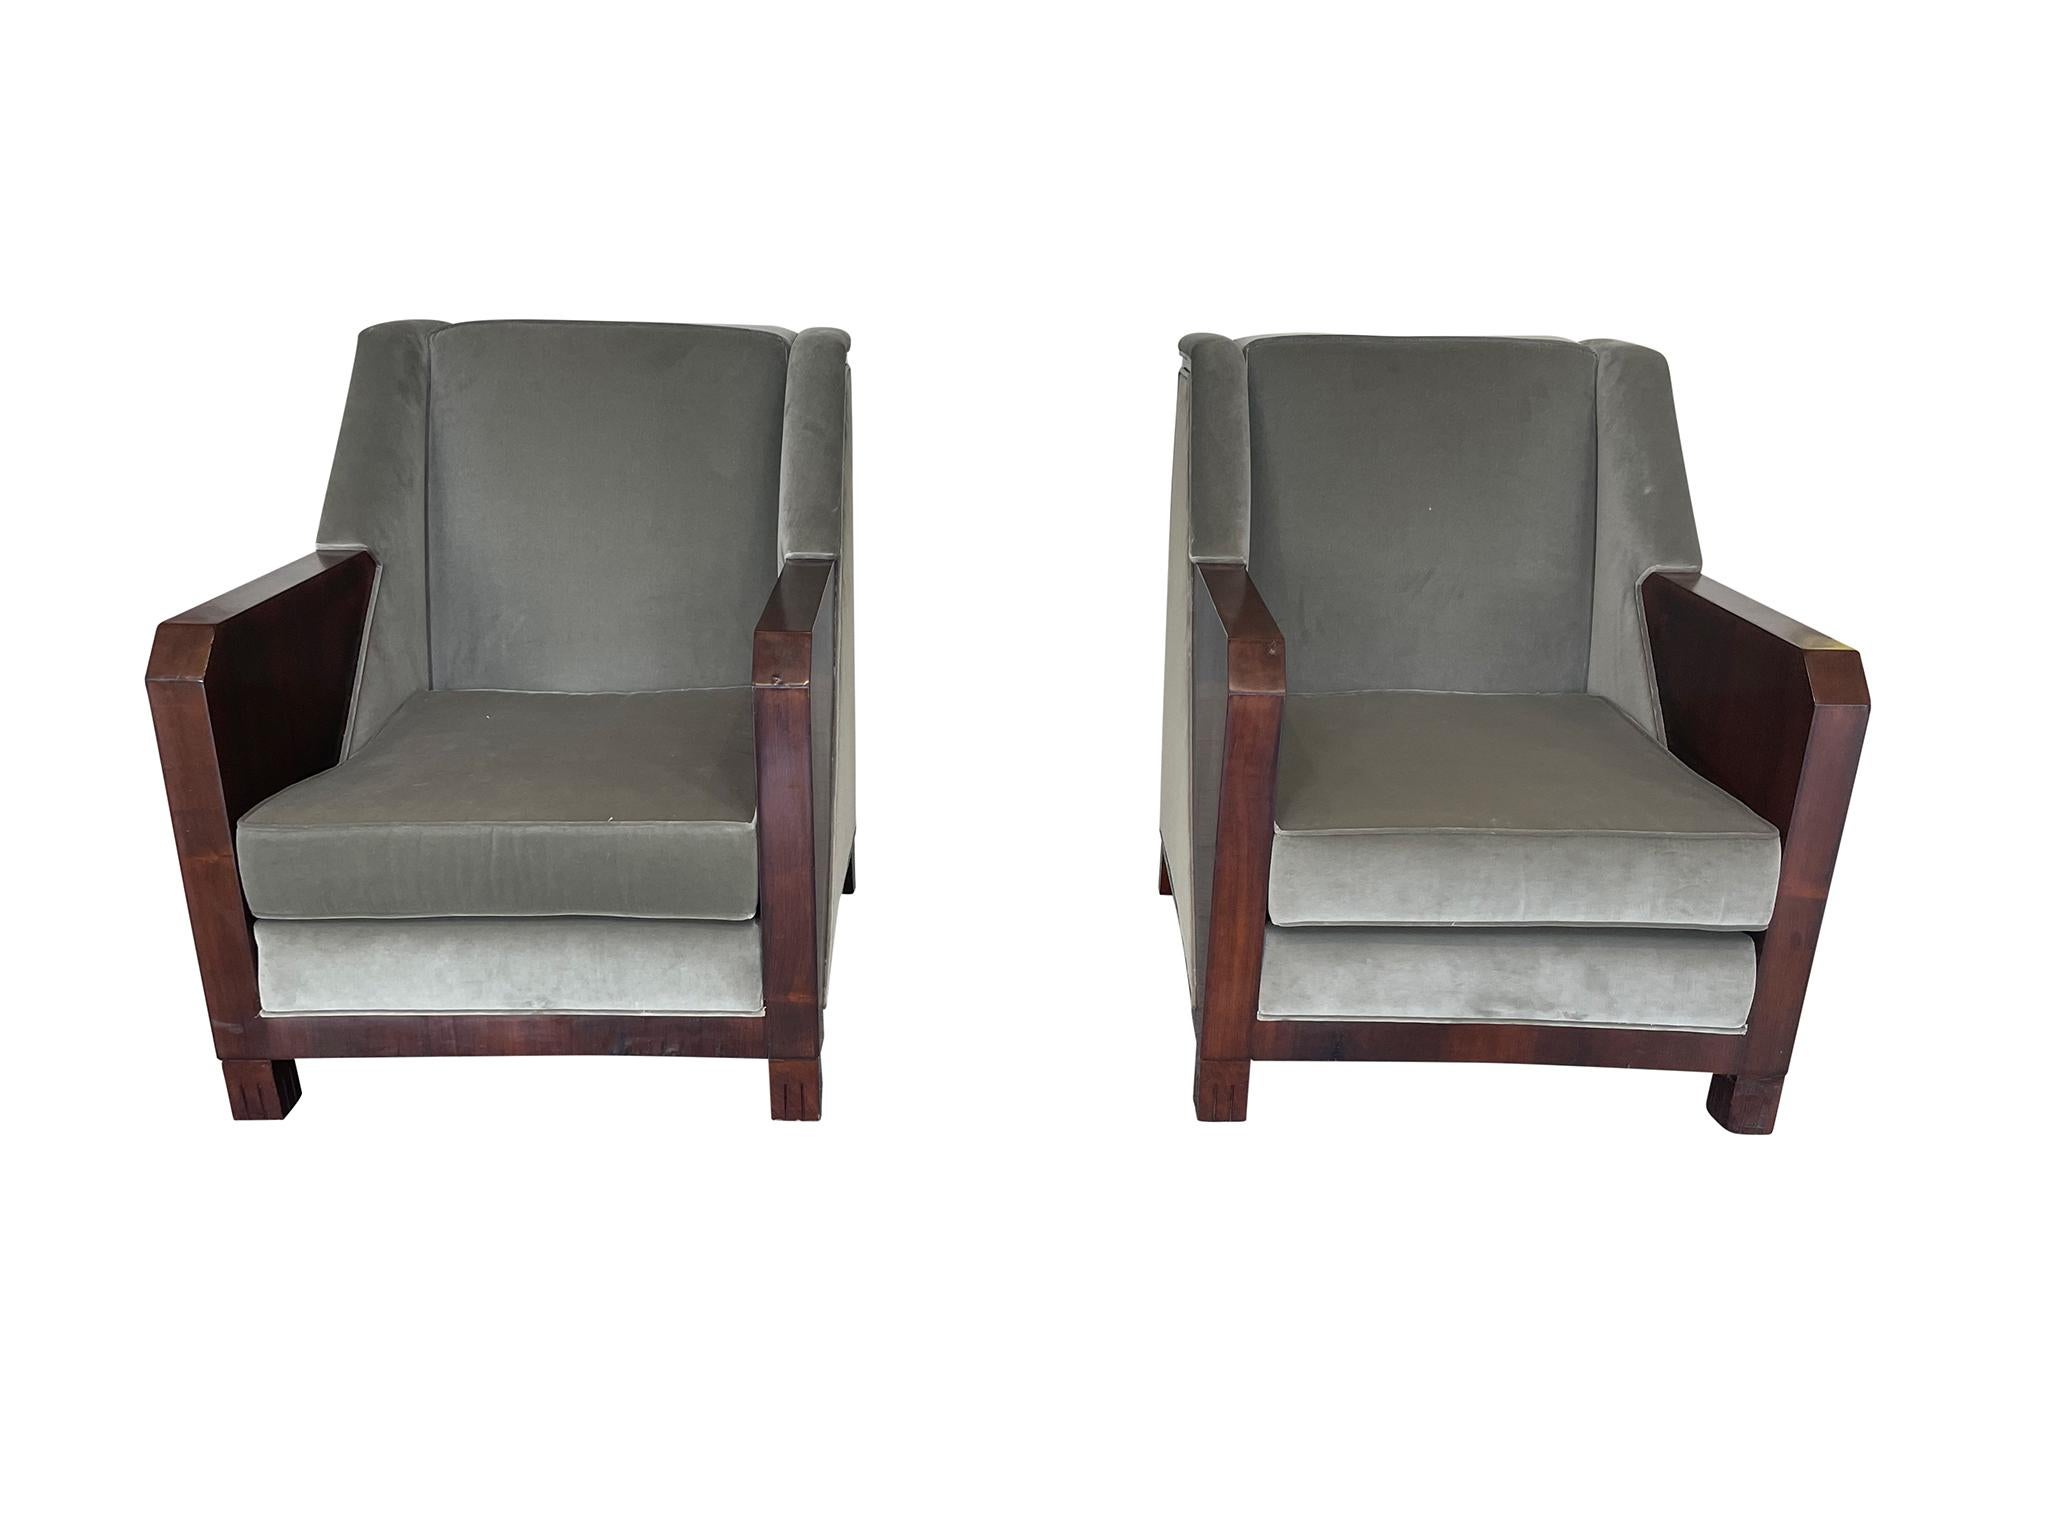 Bold, sleek lines characterize this exquisite pair of Art Deco club chairs by Andre Domin and Marcel Genevriere for Maison Dominique. They are comprised of a rich rosewood frame with gray velvet reupholstery.

Dimensions:
26.75 in. width
35 in.